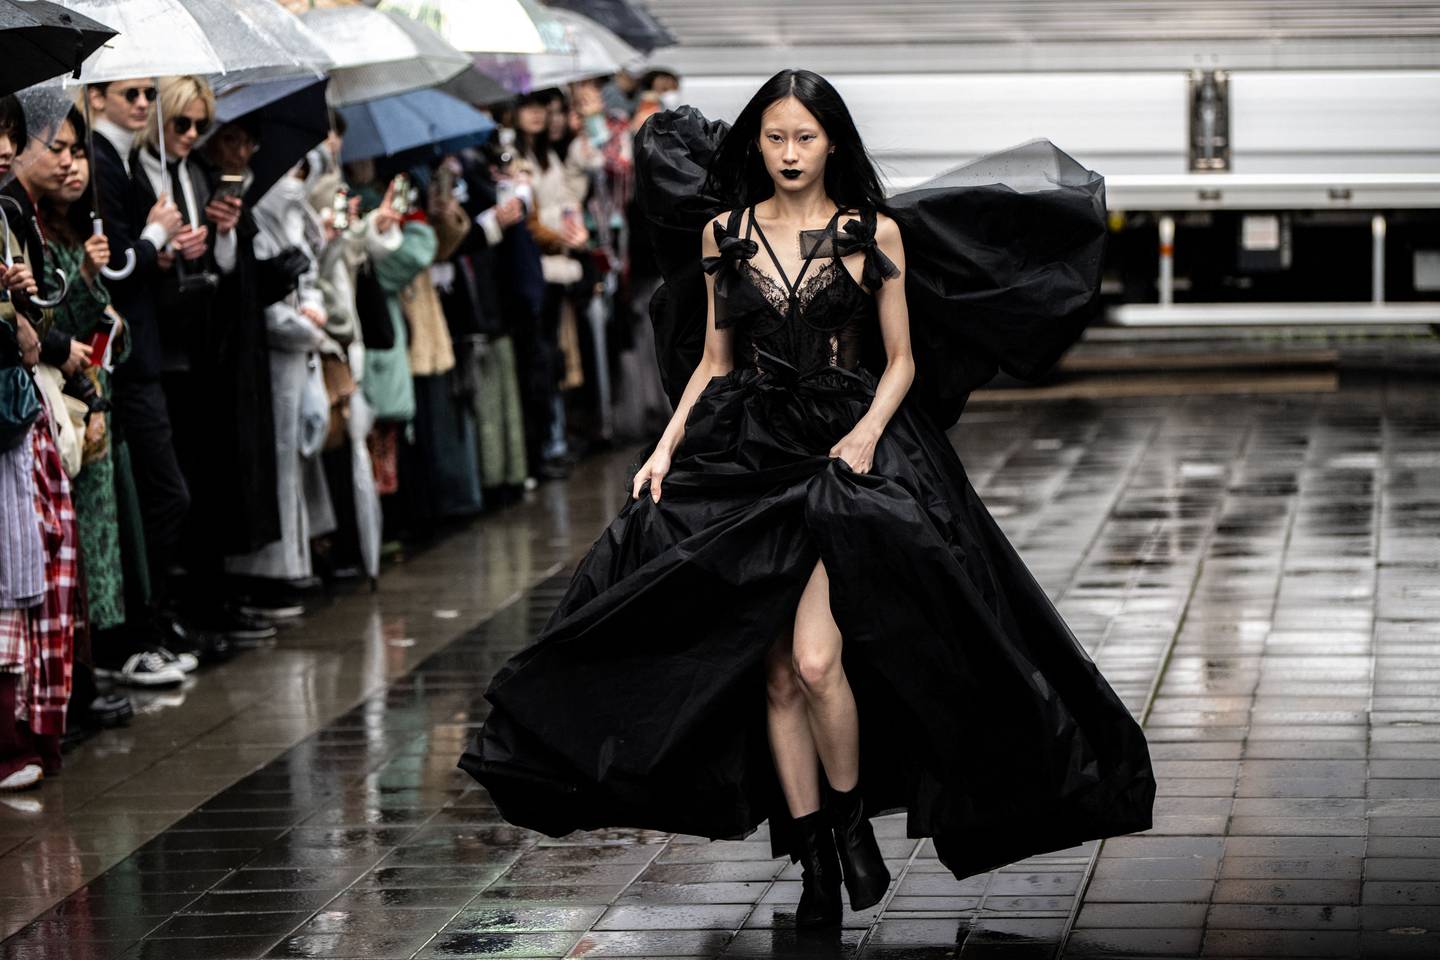 A model displays a creation from the SAYAKAASANO and aki masuda 2023 A/W collection by designers Sayaka Asano and Aki Masuda at the Tokyo Fashion Week.